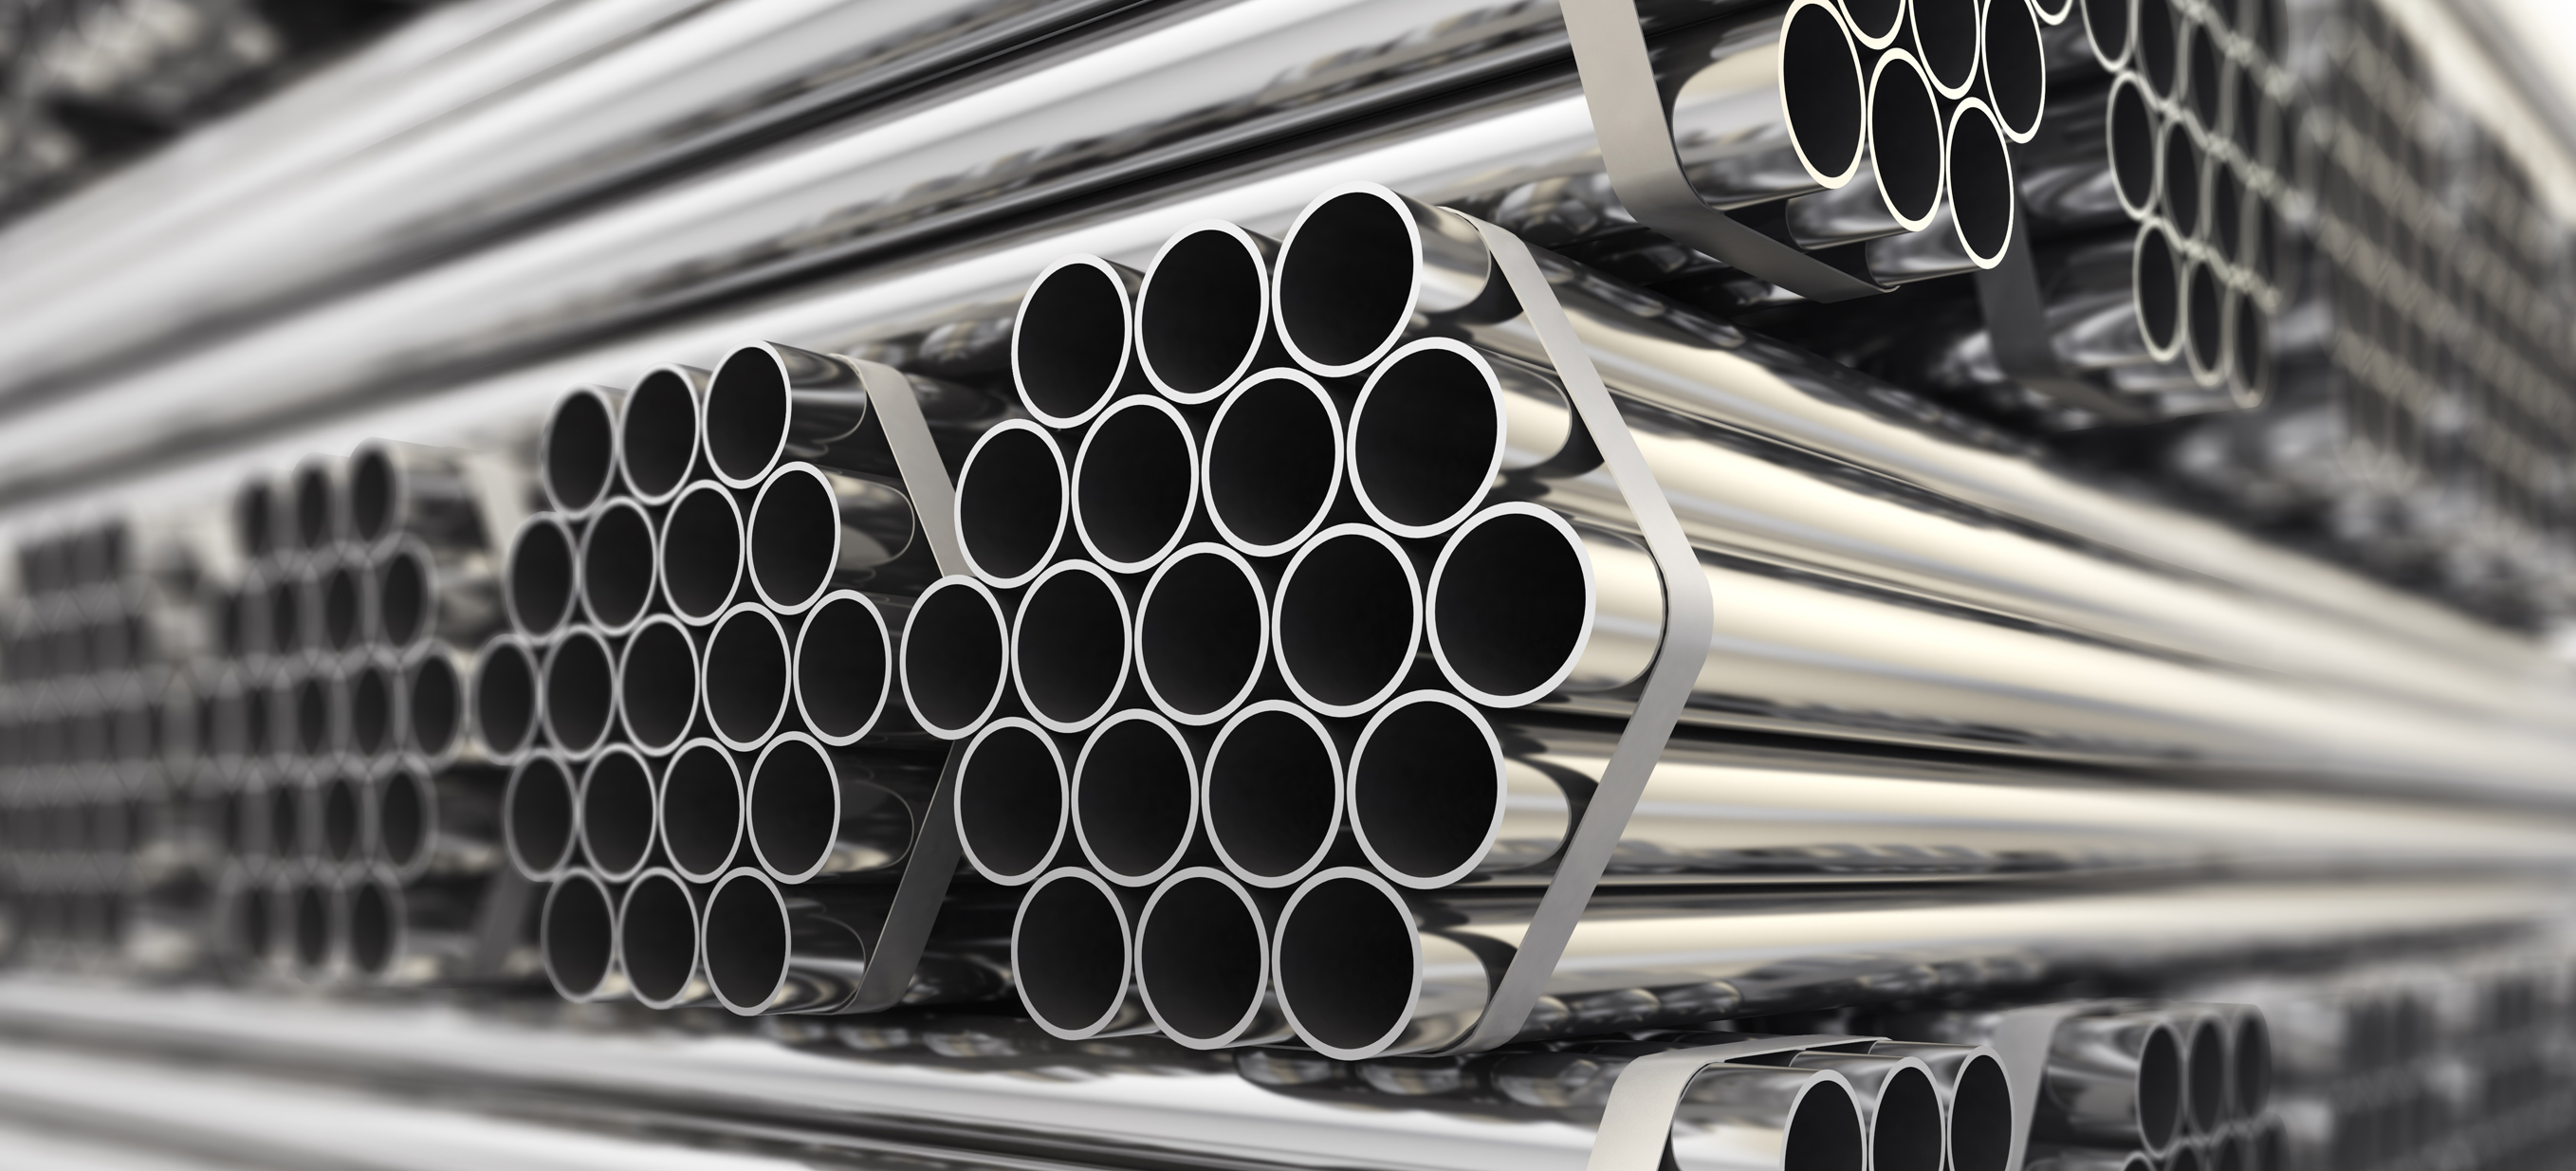 Stainless Steel Seamless Pipe & Tubes in Chennai,Stainless Steel Seamless Pipe & Tubes in Coimbatore